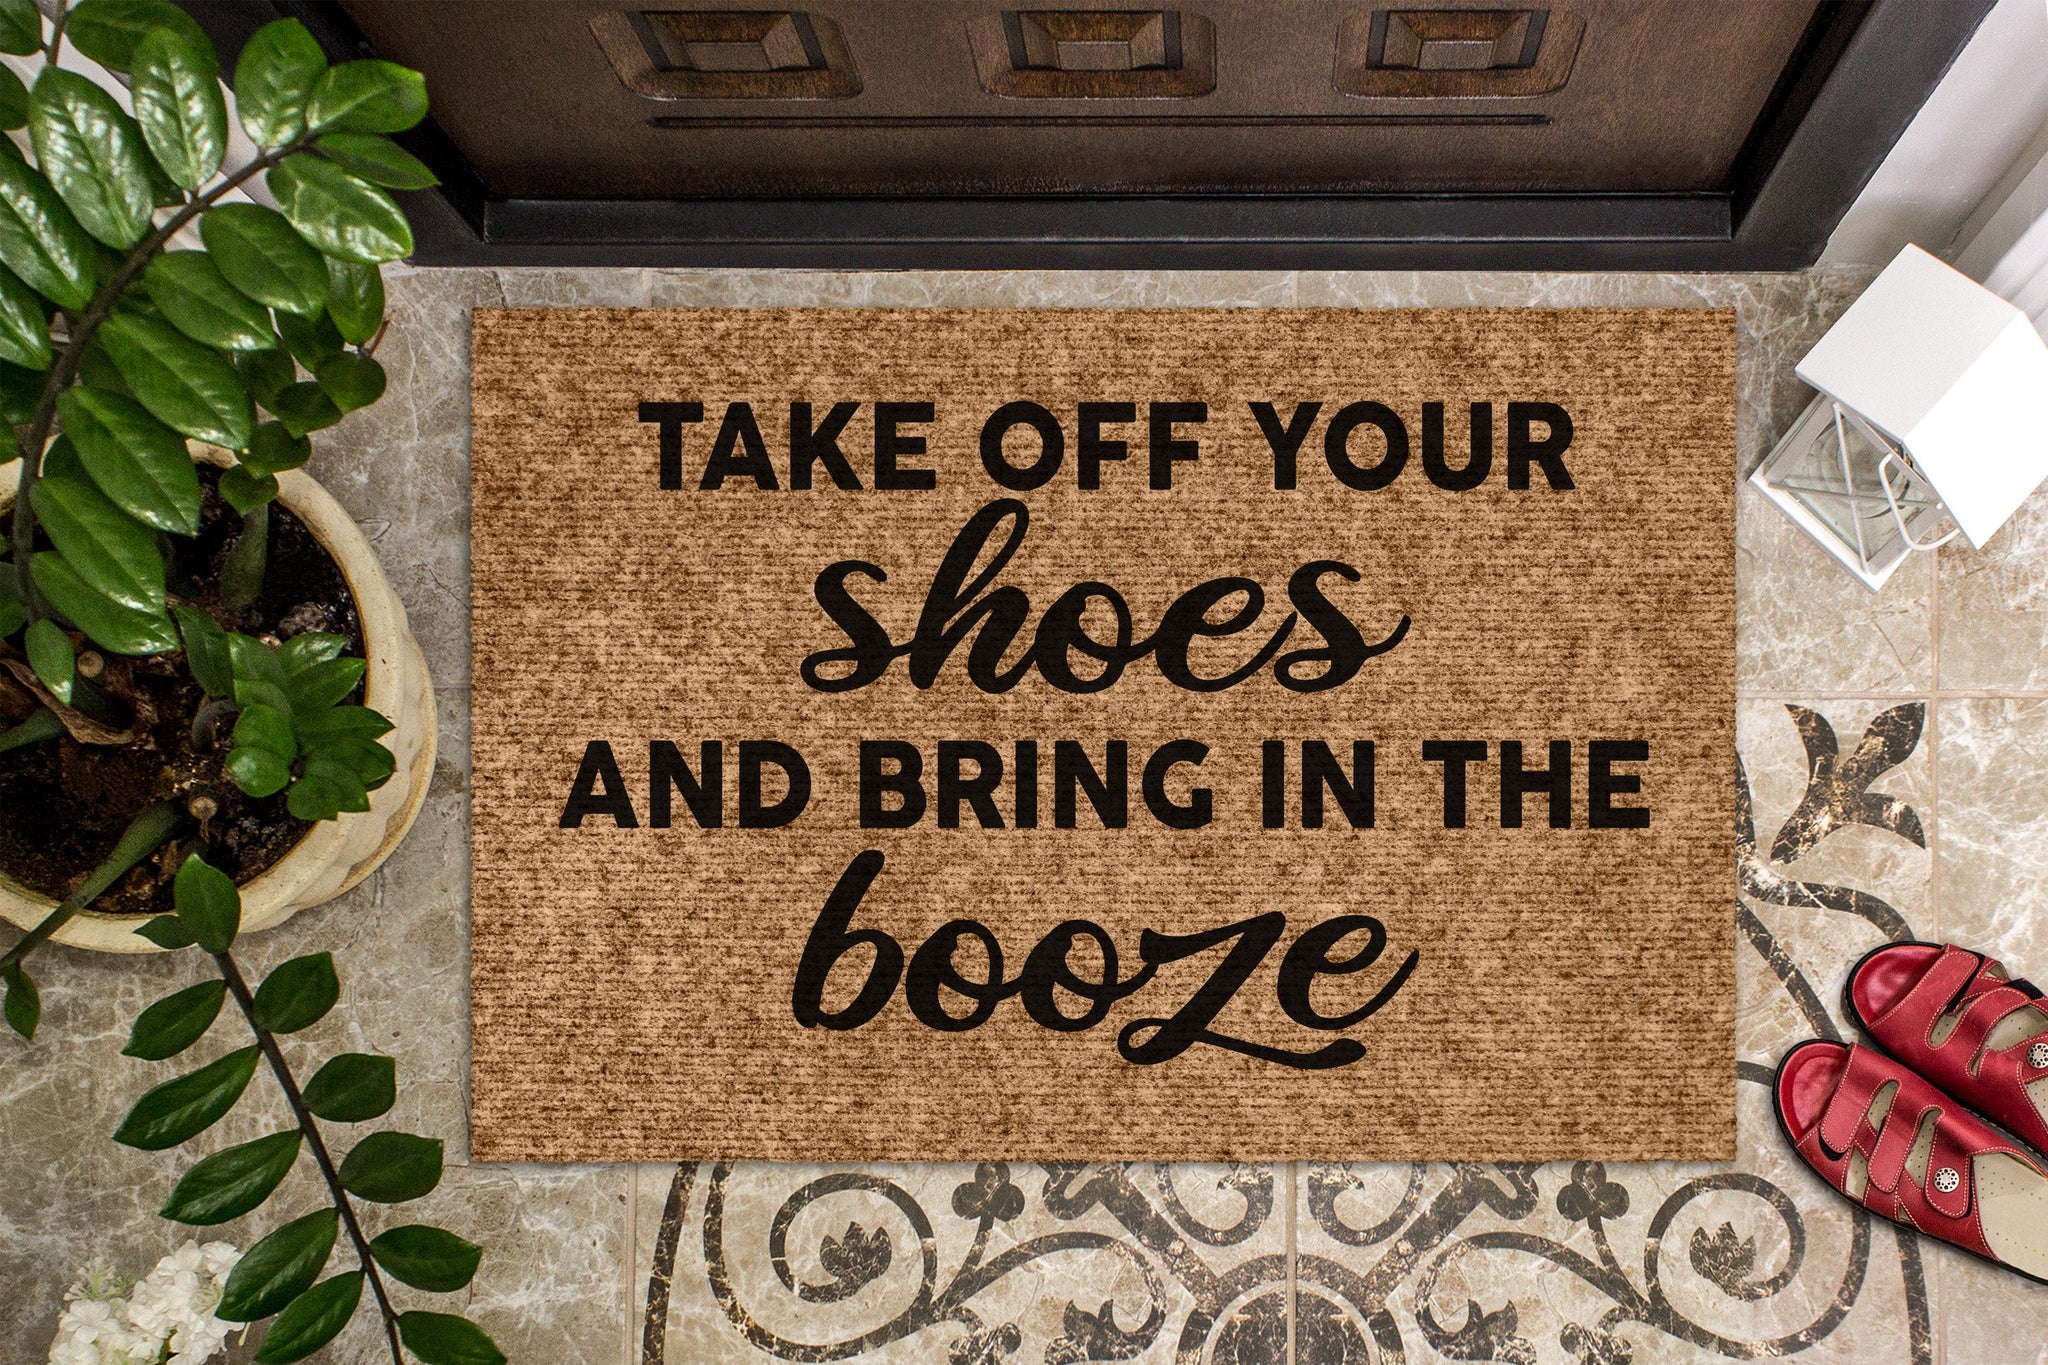 Off With Your Shoes Funny Doormat